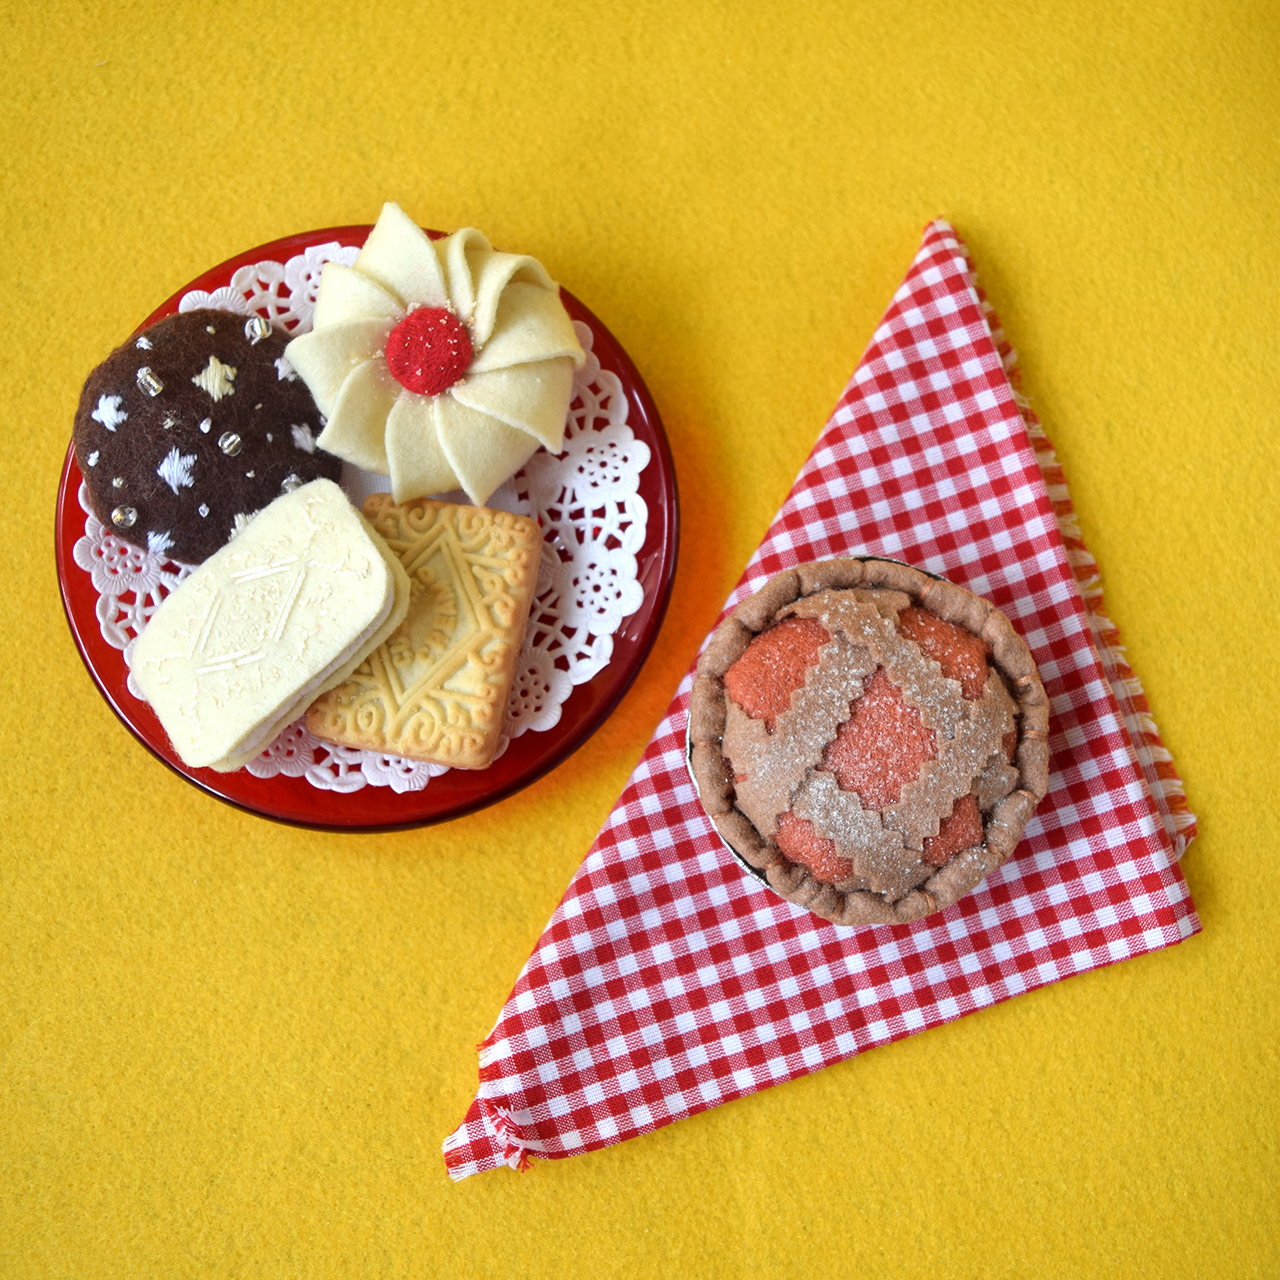 Italian and British felt biscuits by Ilaria from Zest & Lavender